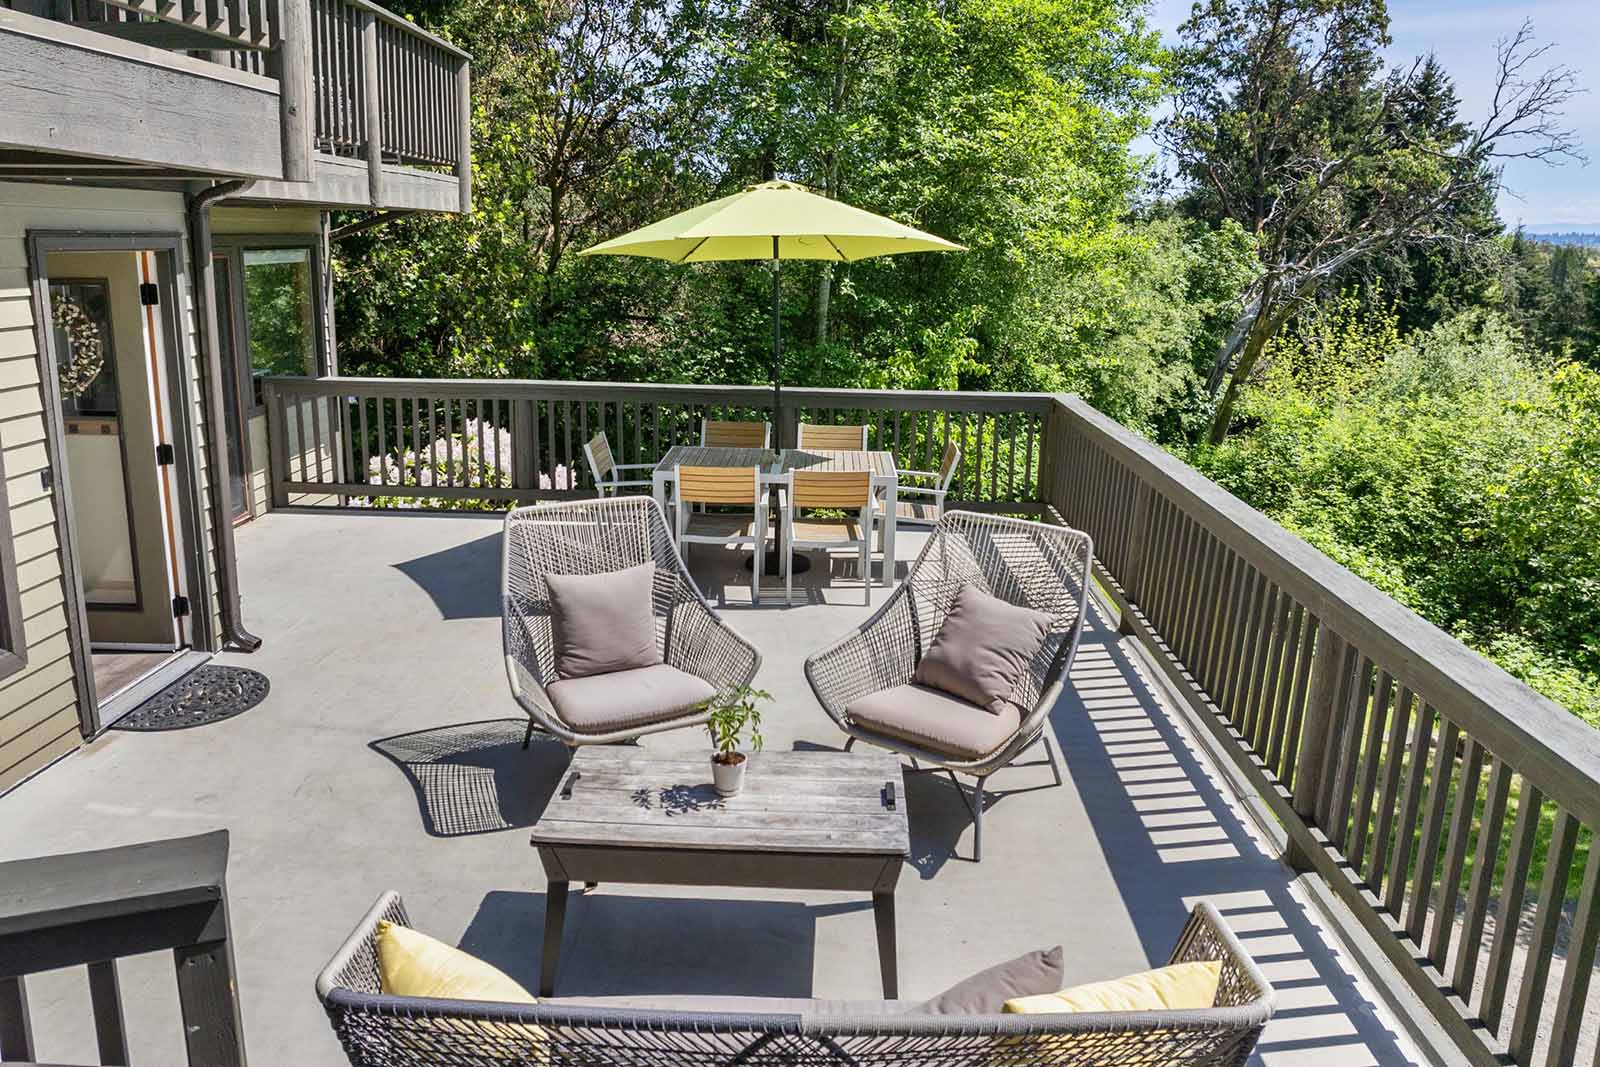 Spacious deck off the main living space is ideal for entertaining